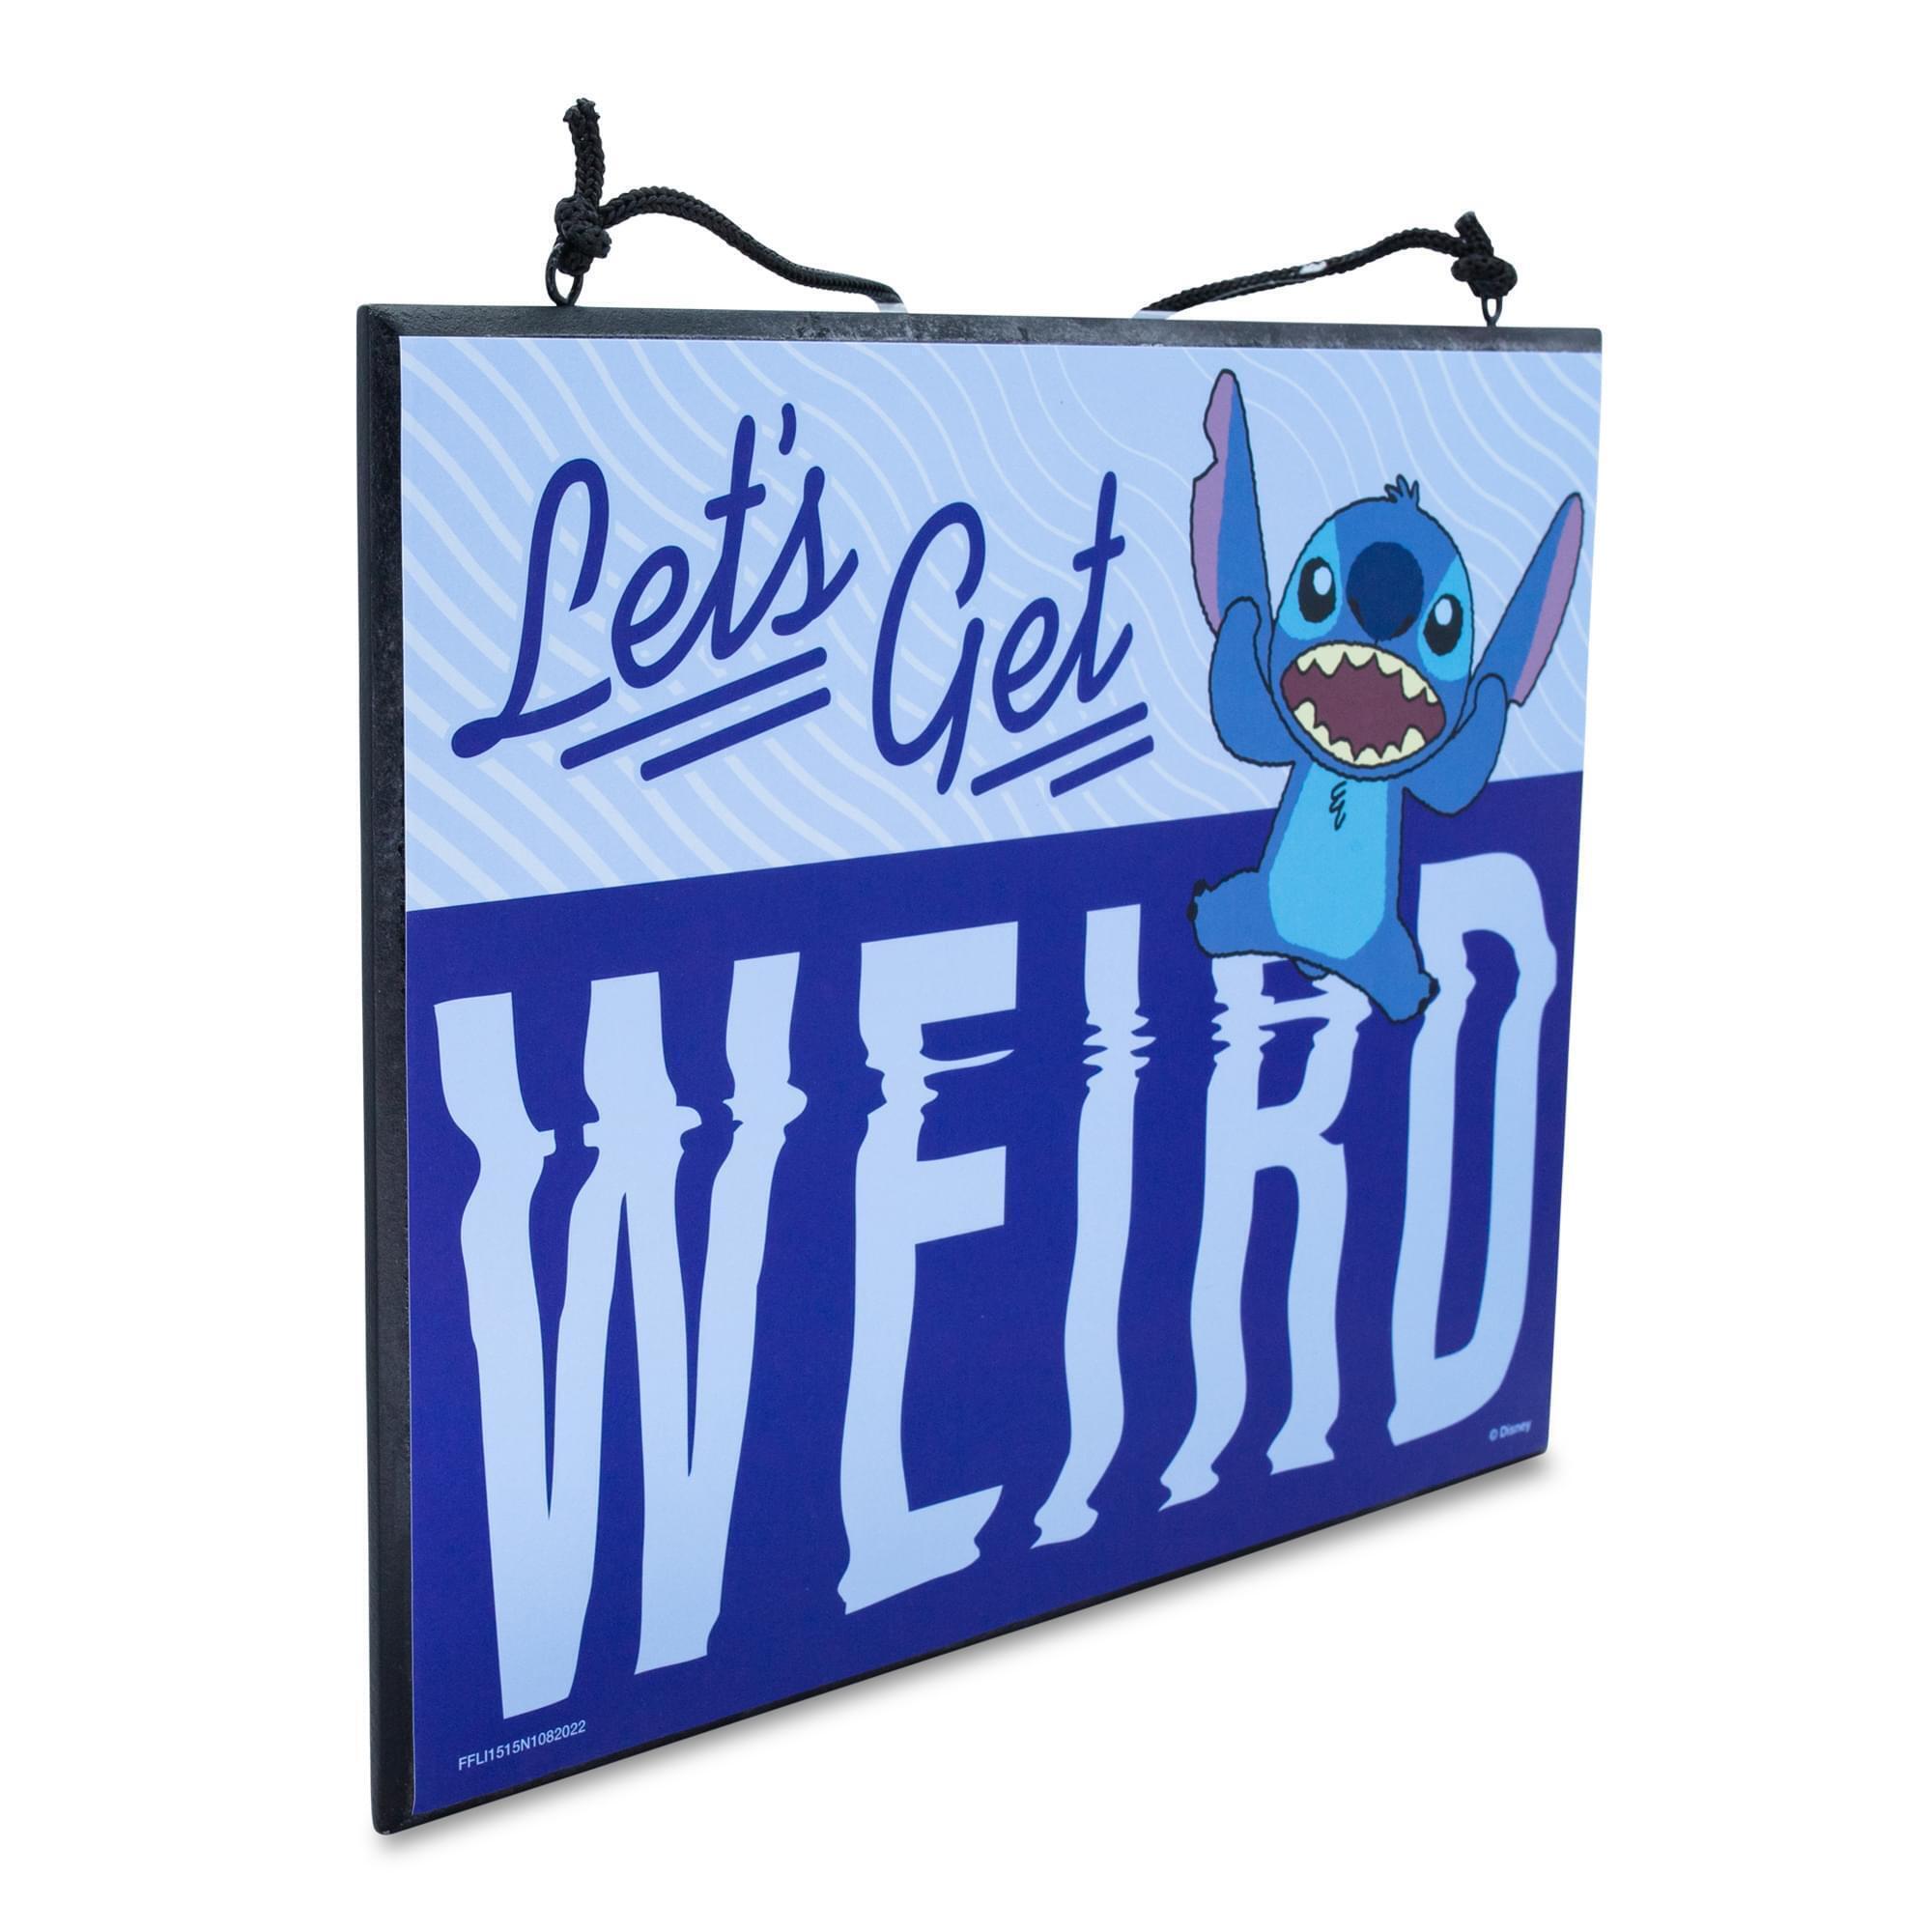 Disney Lilo & Stitch "Let's Get Weird" Reversible Hanging Sign Wall Art alternate image